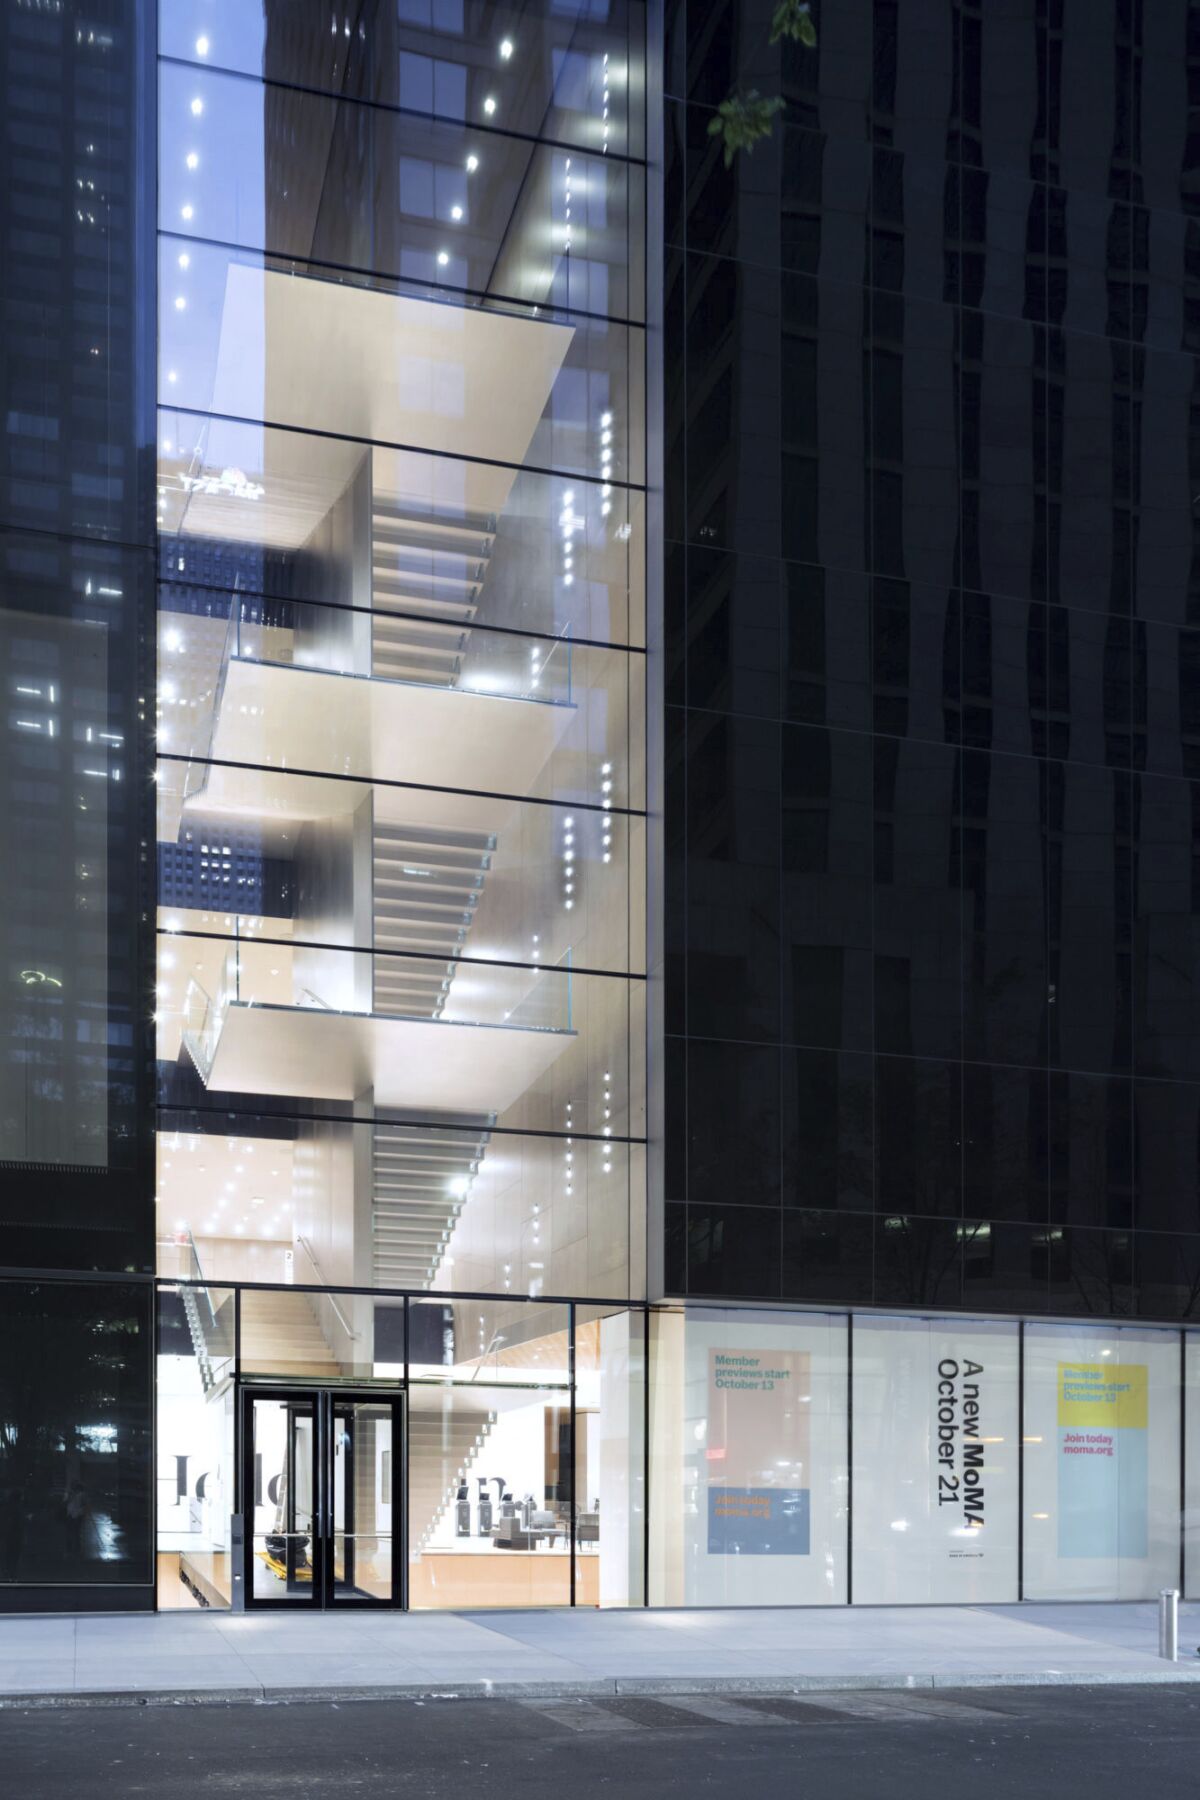 An exterior view of the Blade Stair Atrium, part of the renovation and expansion effort at the Museum of Modern Art in New York.